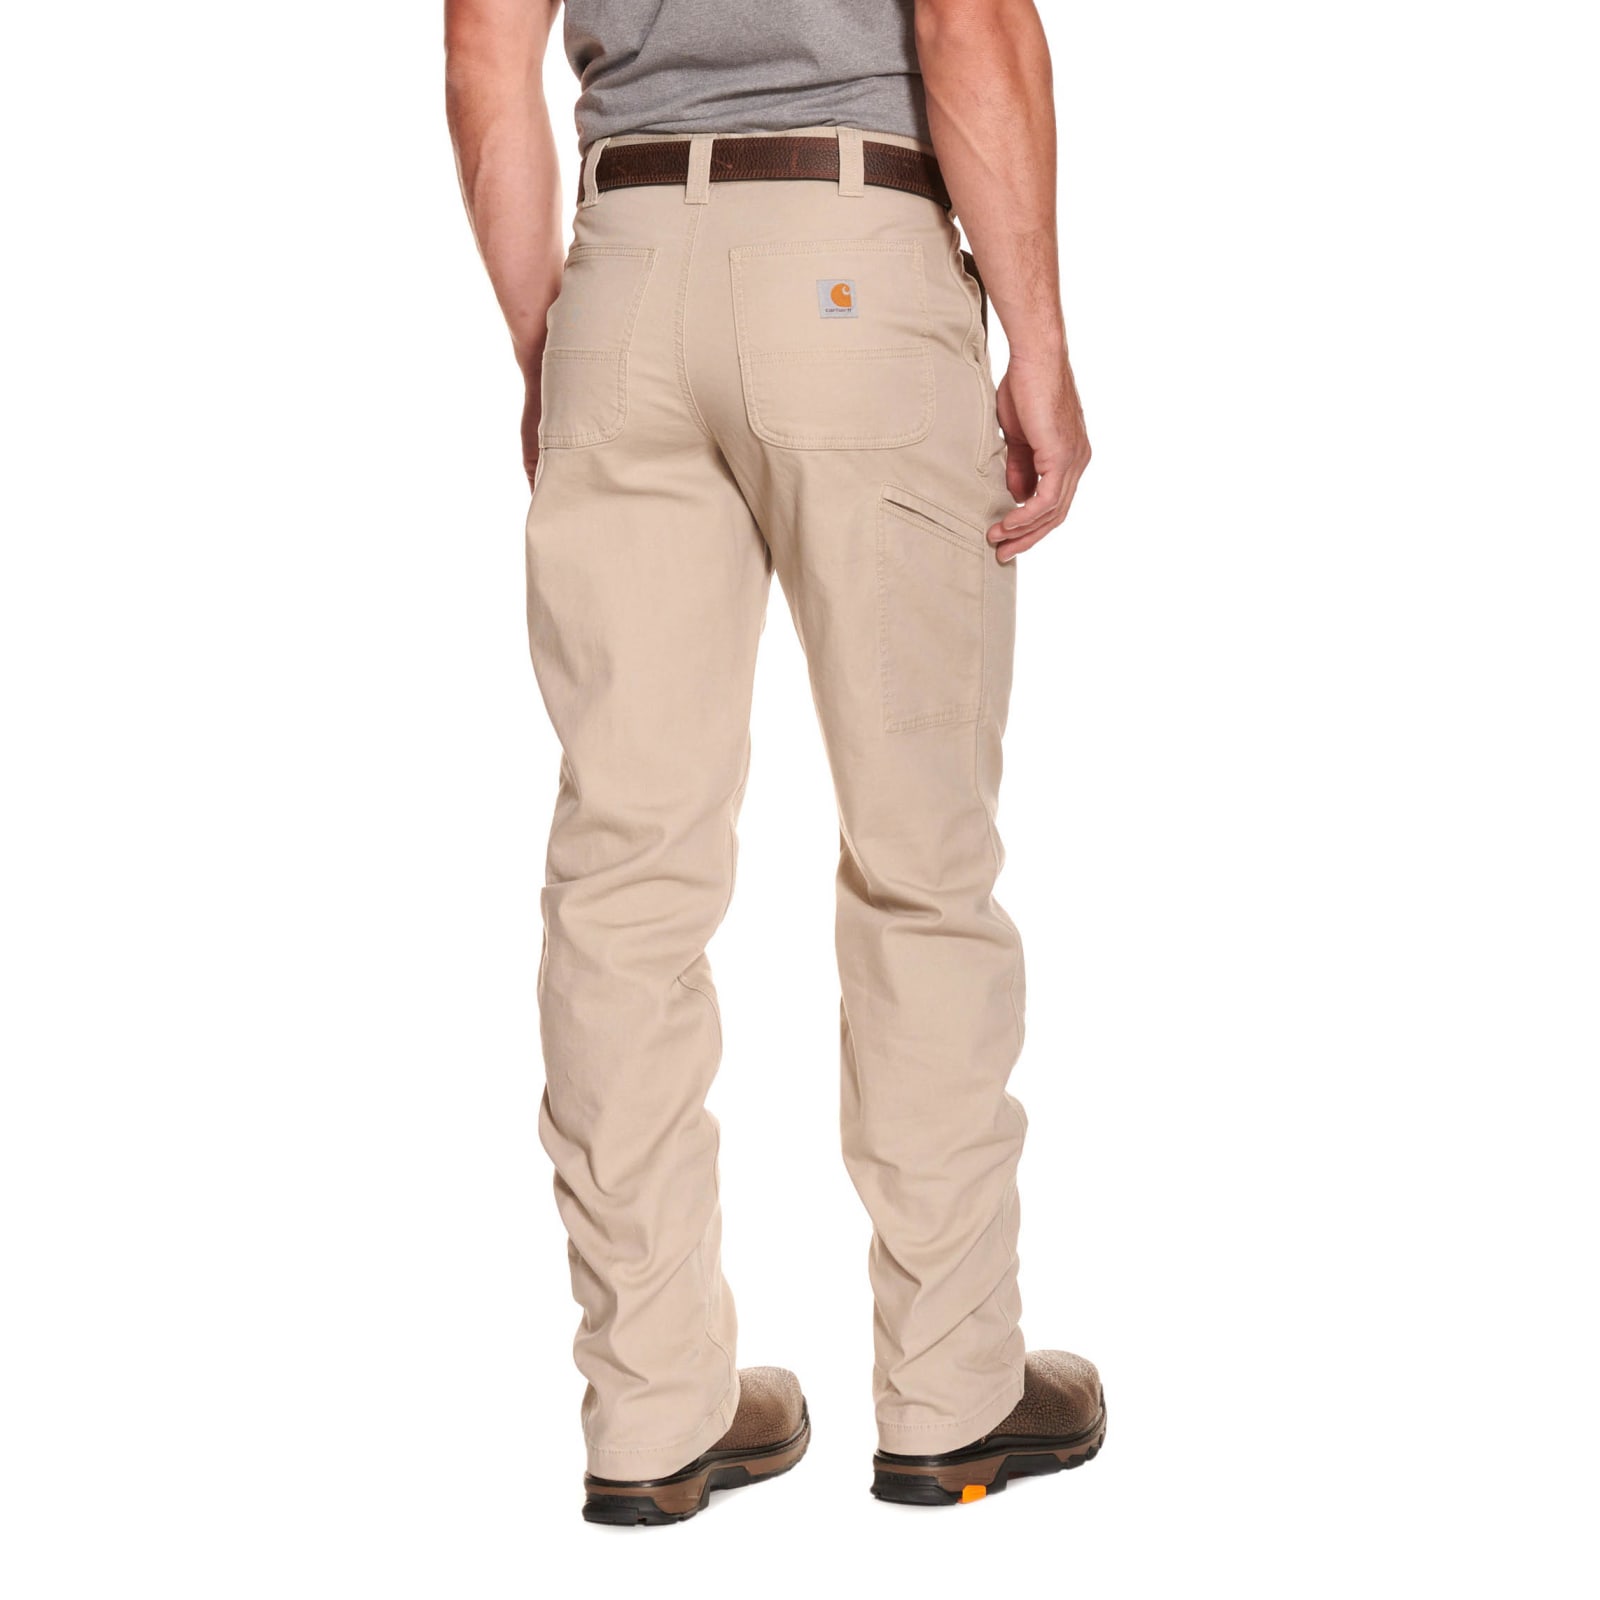 Carhartt Men's Tan Relaxed Fit Straight Leg Rugged Flex Stretch Canvas Work  Pants available at Cavenders